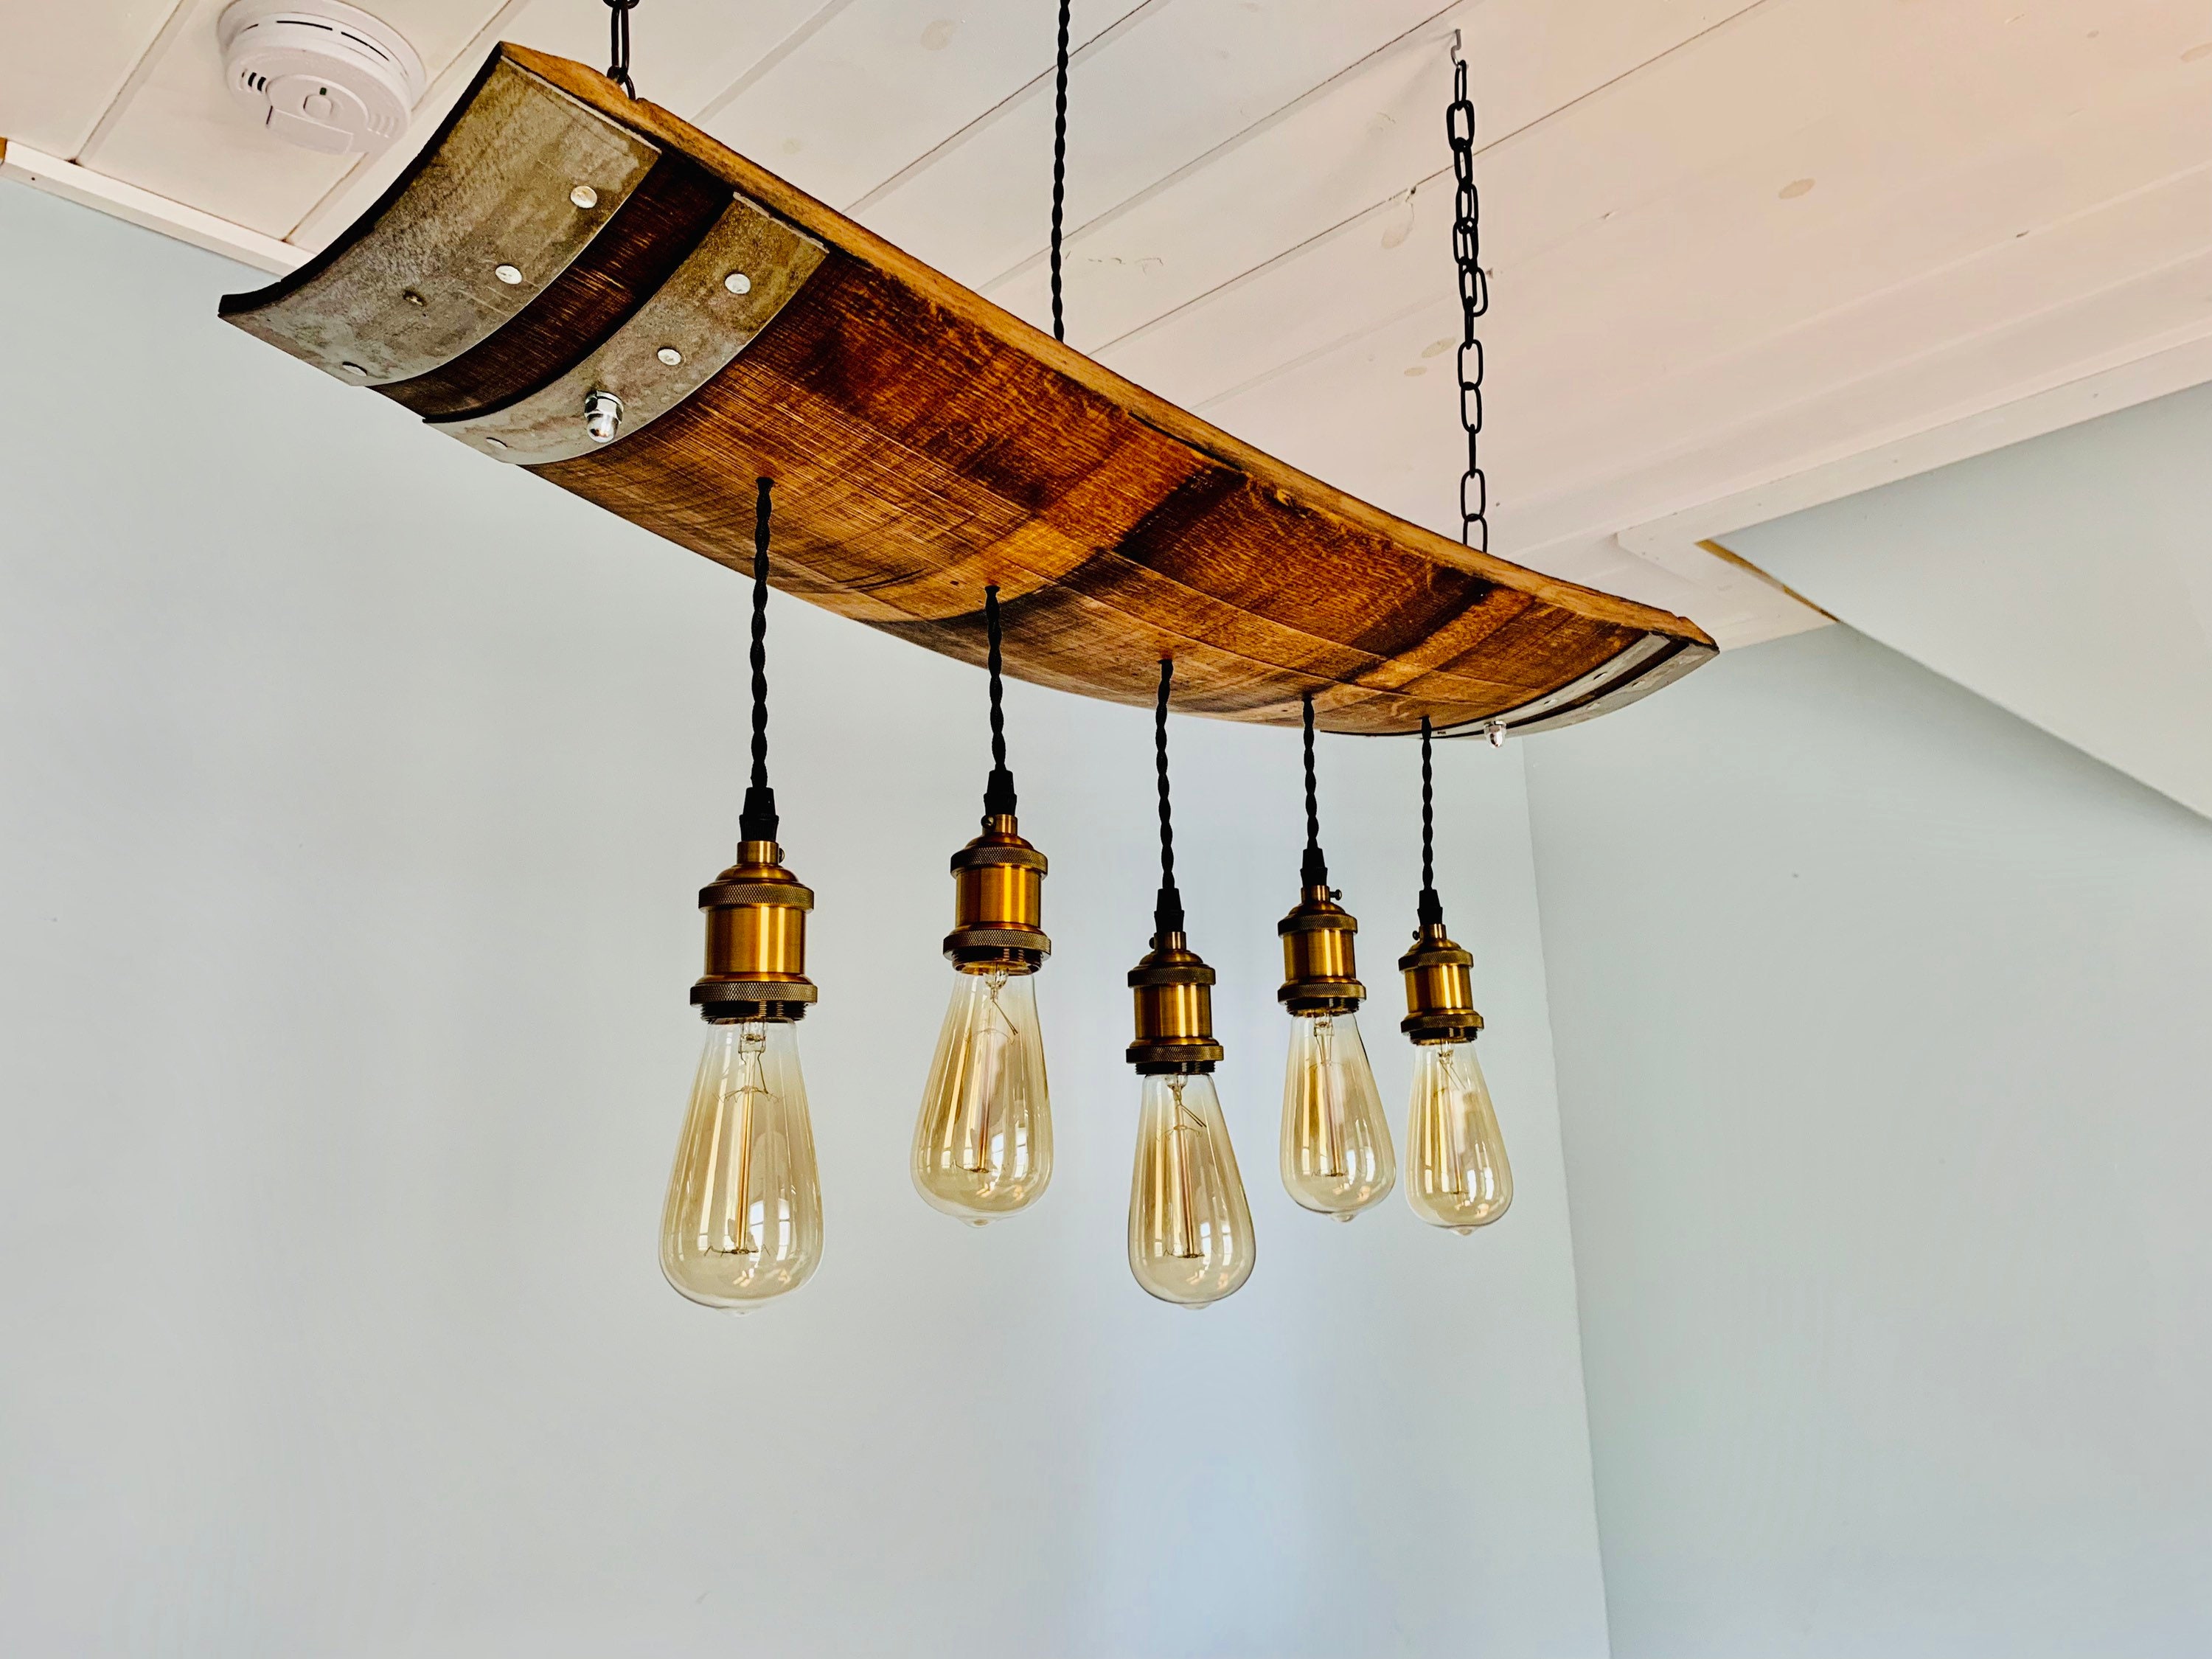 Wine Barrel Stave Chandelier Made From Reclaimed California Wine Barrels  100% Recycled and Free Shipping - Etsy